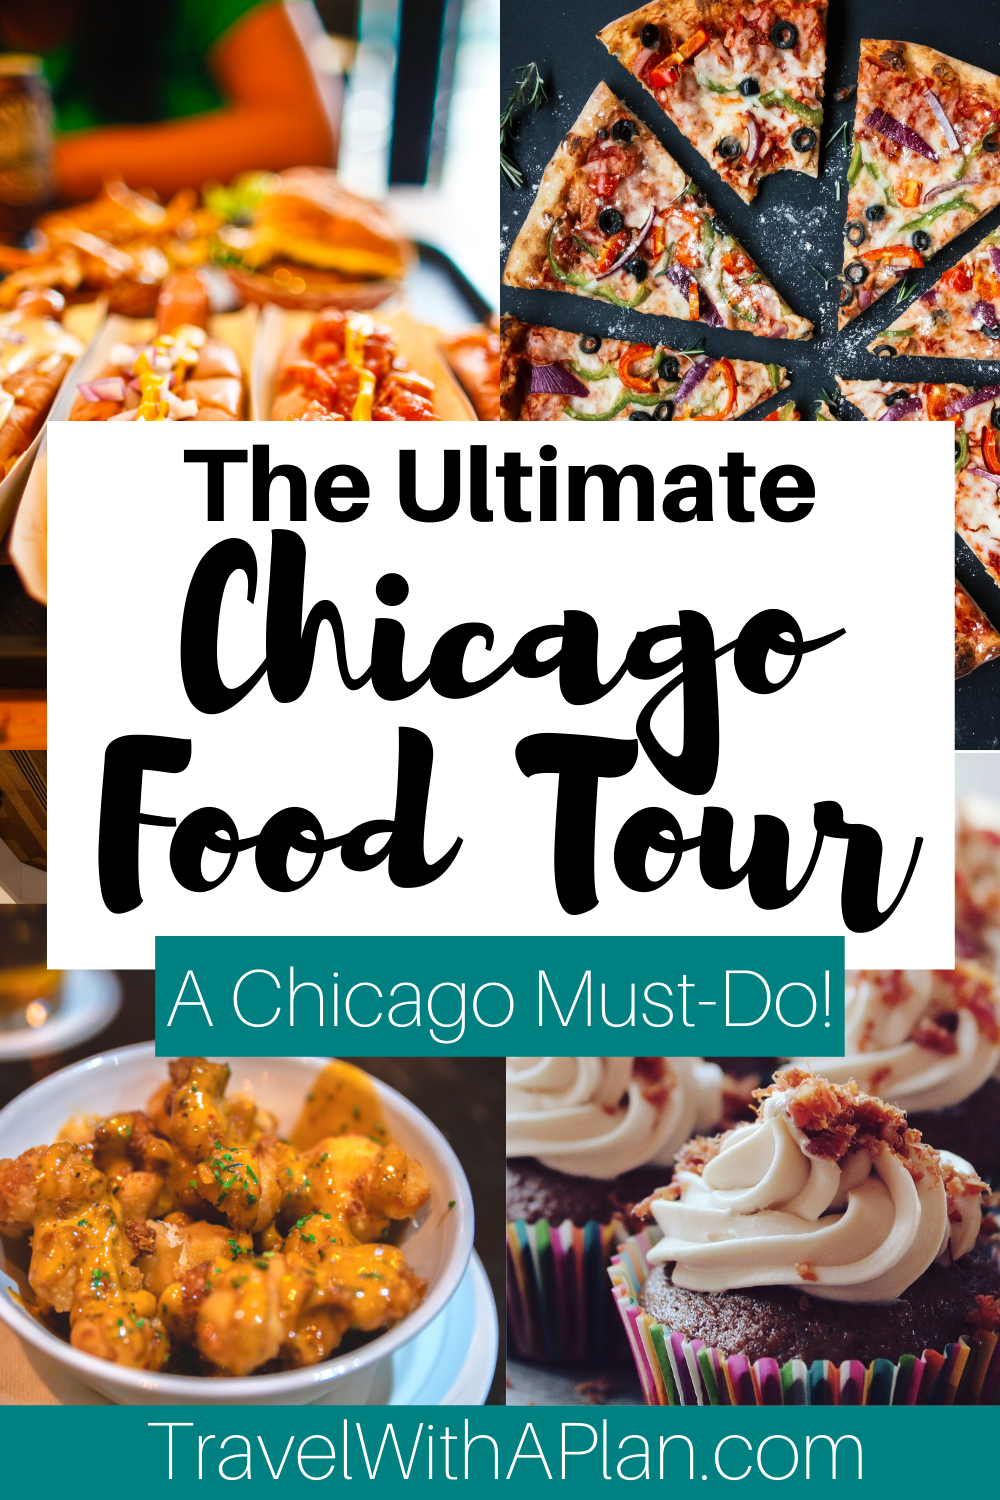 Learn all about our favorite Chicago Food Tours!  A must-do activity during any Chicago family vacation, taking a guided Chicago Food Tour allows you to sample and learn about the best eats in the area!  #Chicago #Chicagofoodtours #navypier #thingstodoinchicago #familytravel #bestfamilyvacationspots #bestfoodinchicago